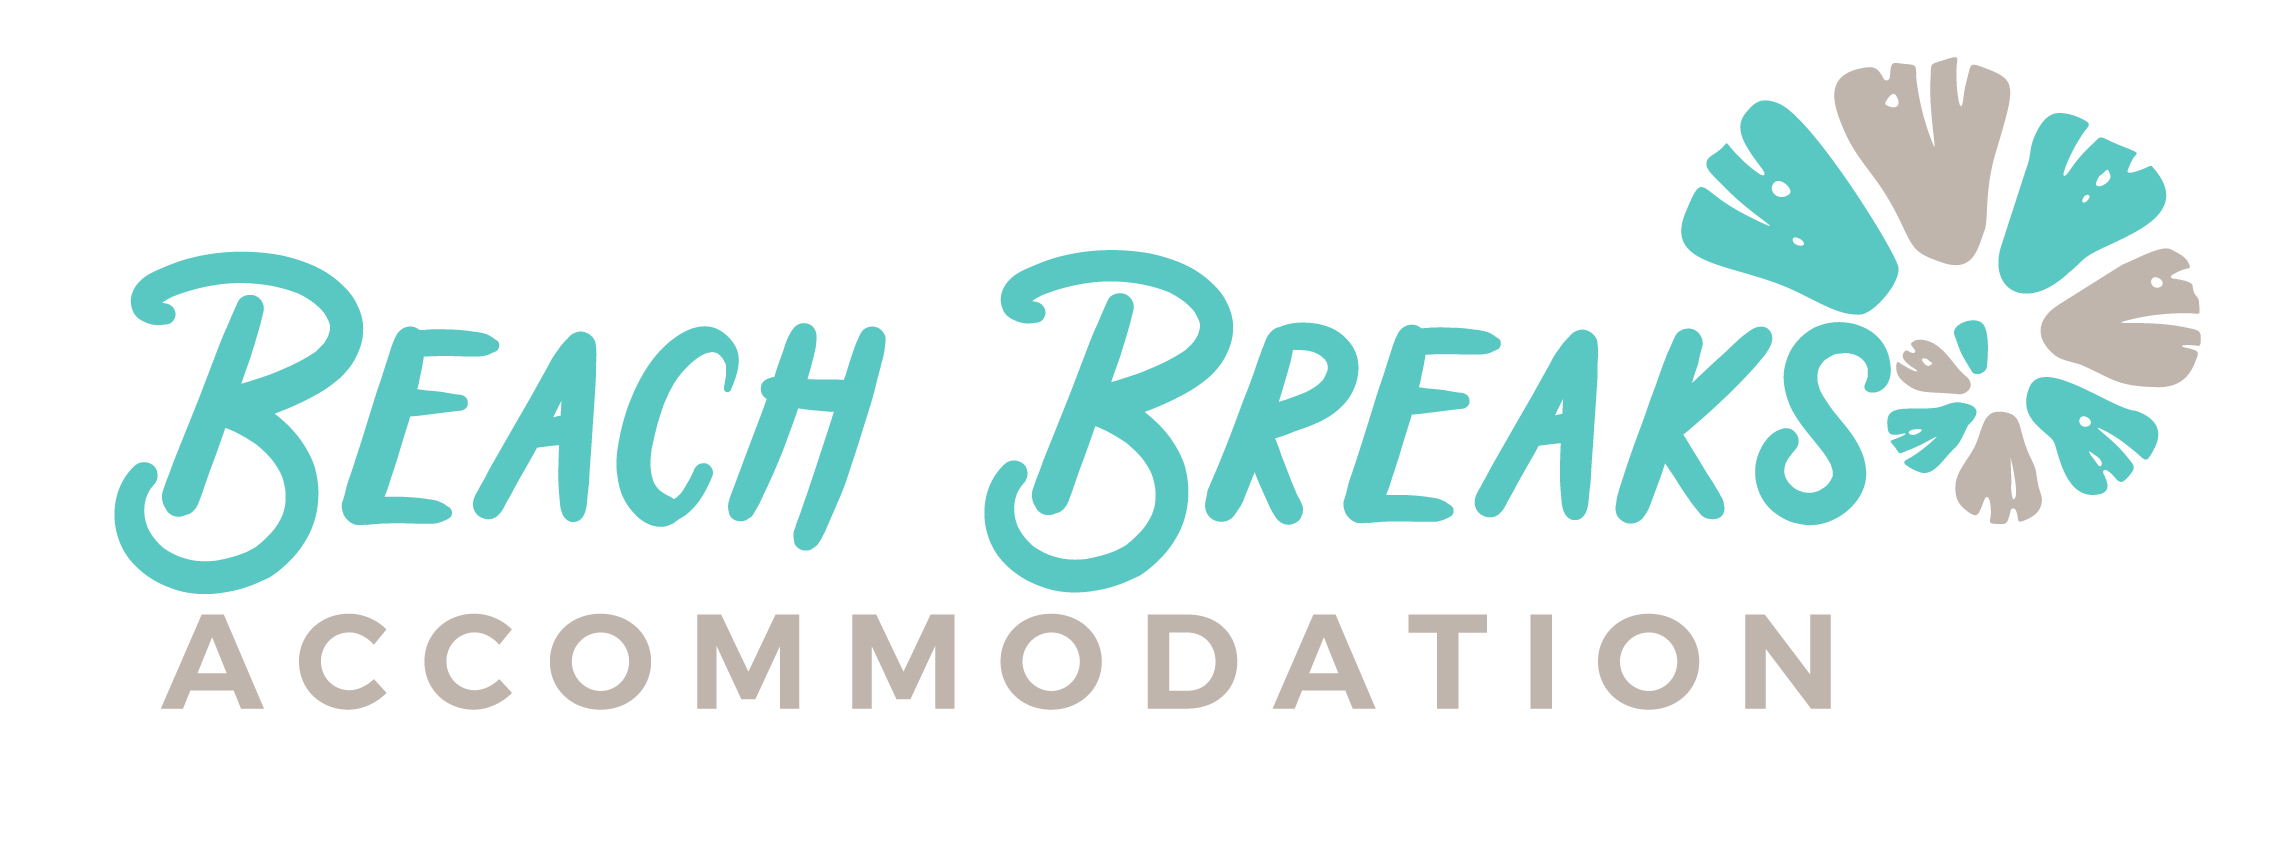 Beach Breaks Accommodation |   Accommodation Types  Appartment